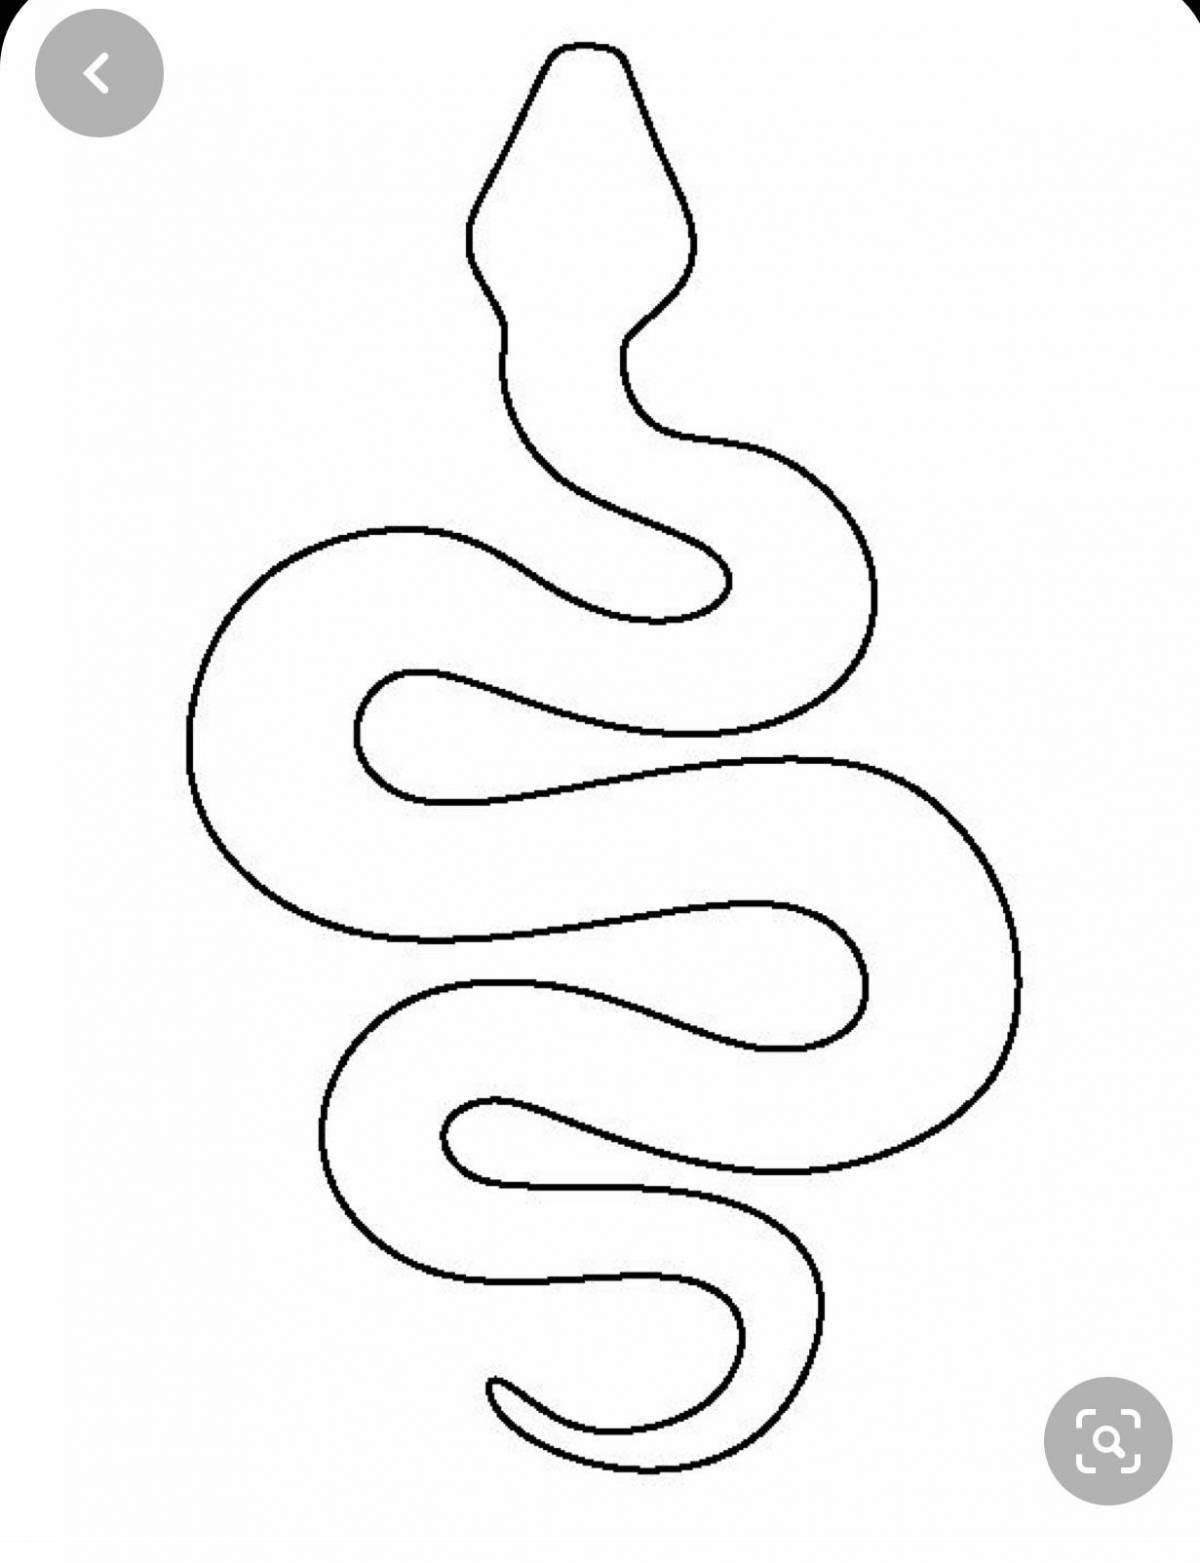 Generous Budge blue snake coloring page